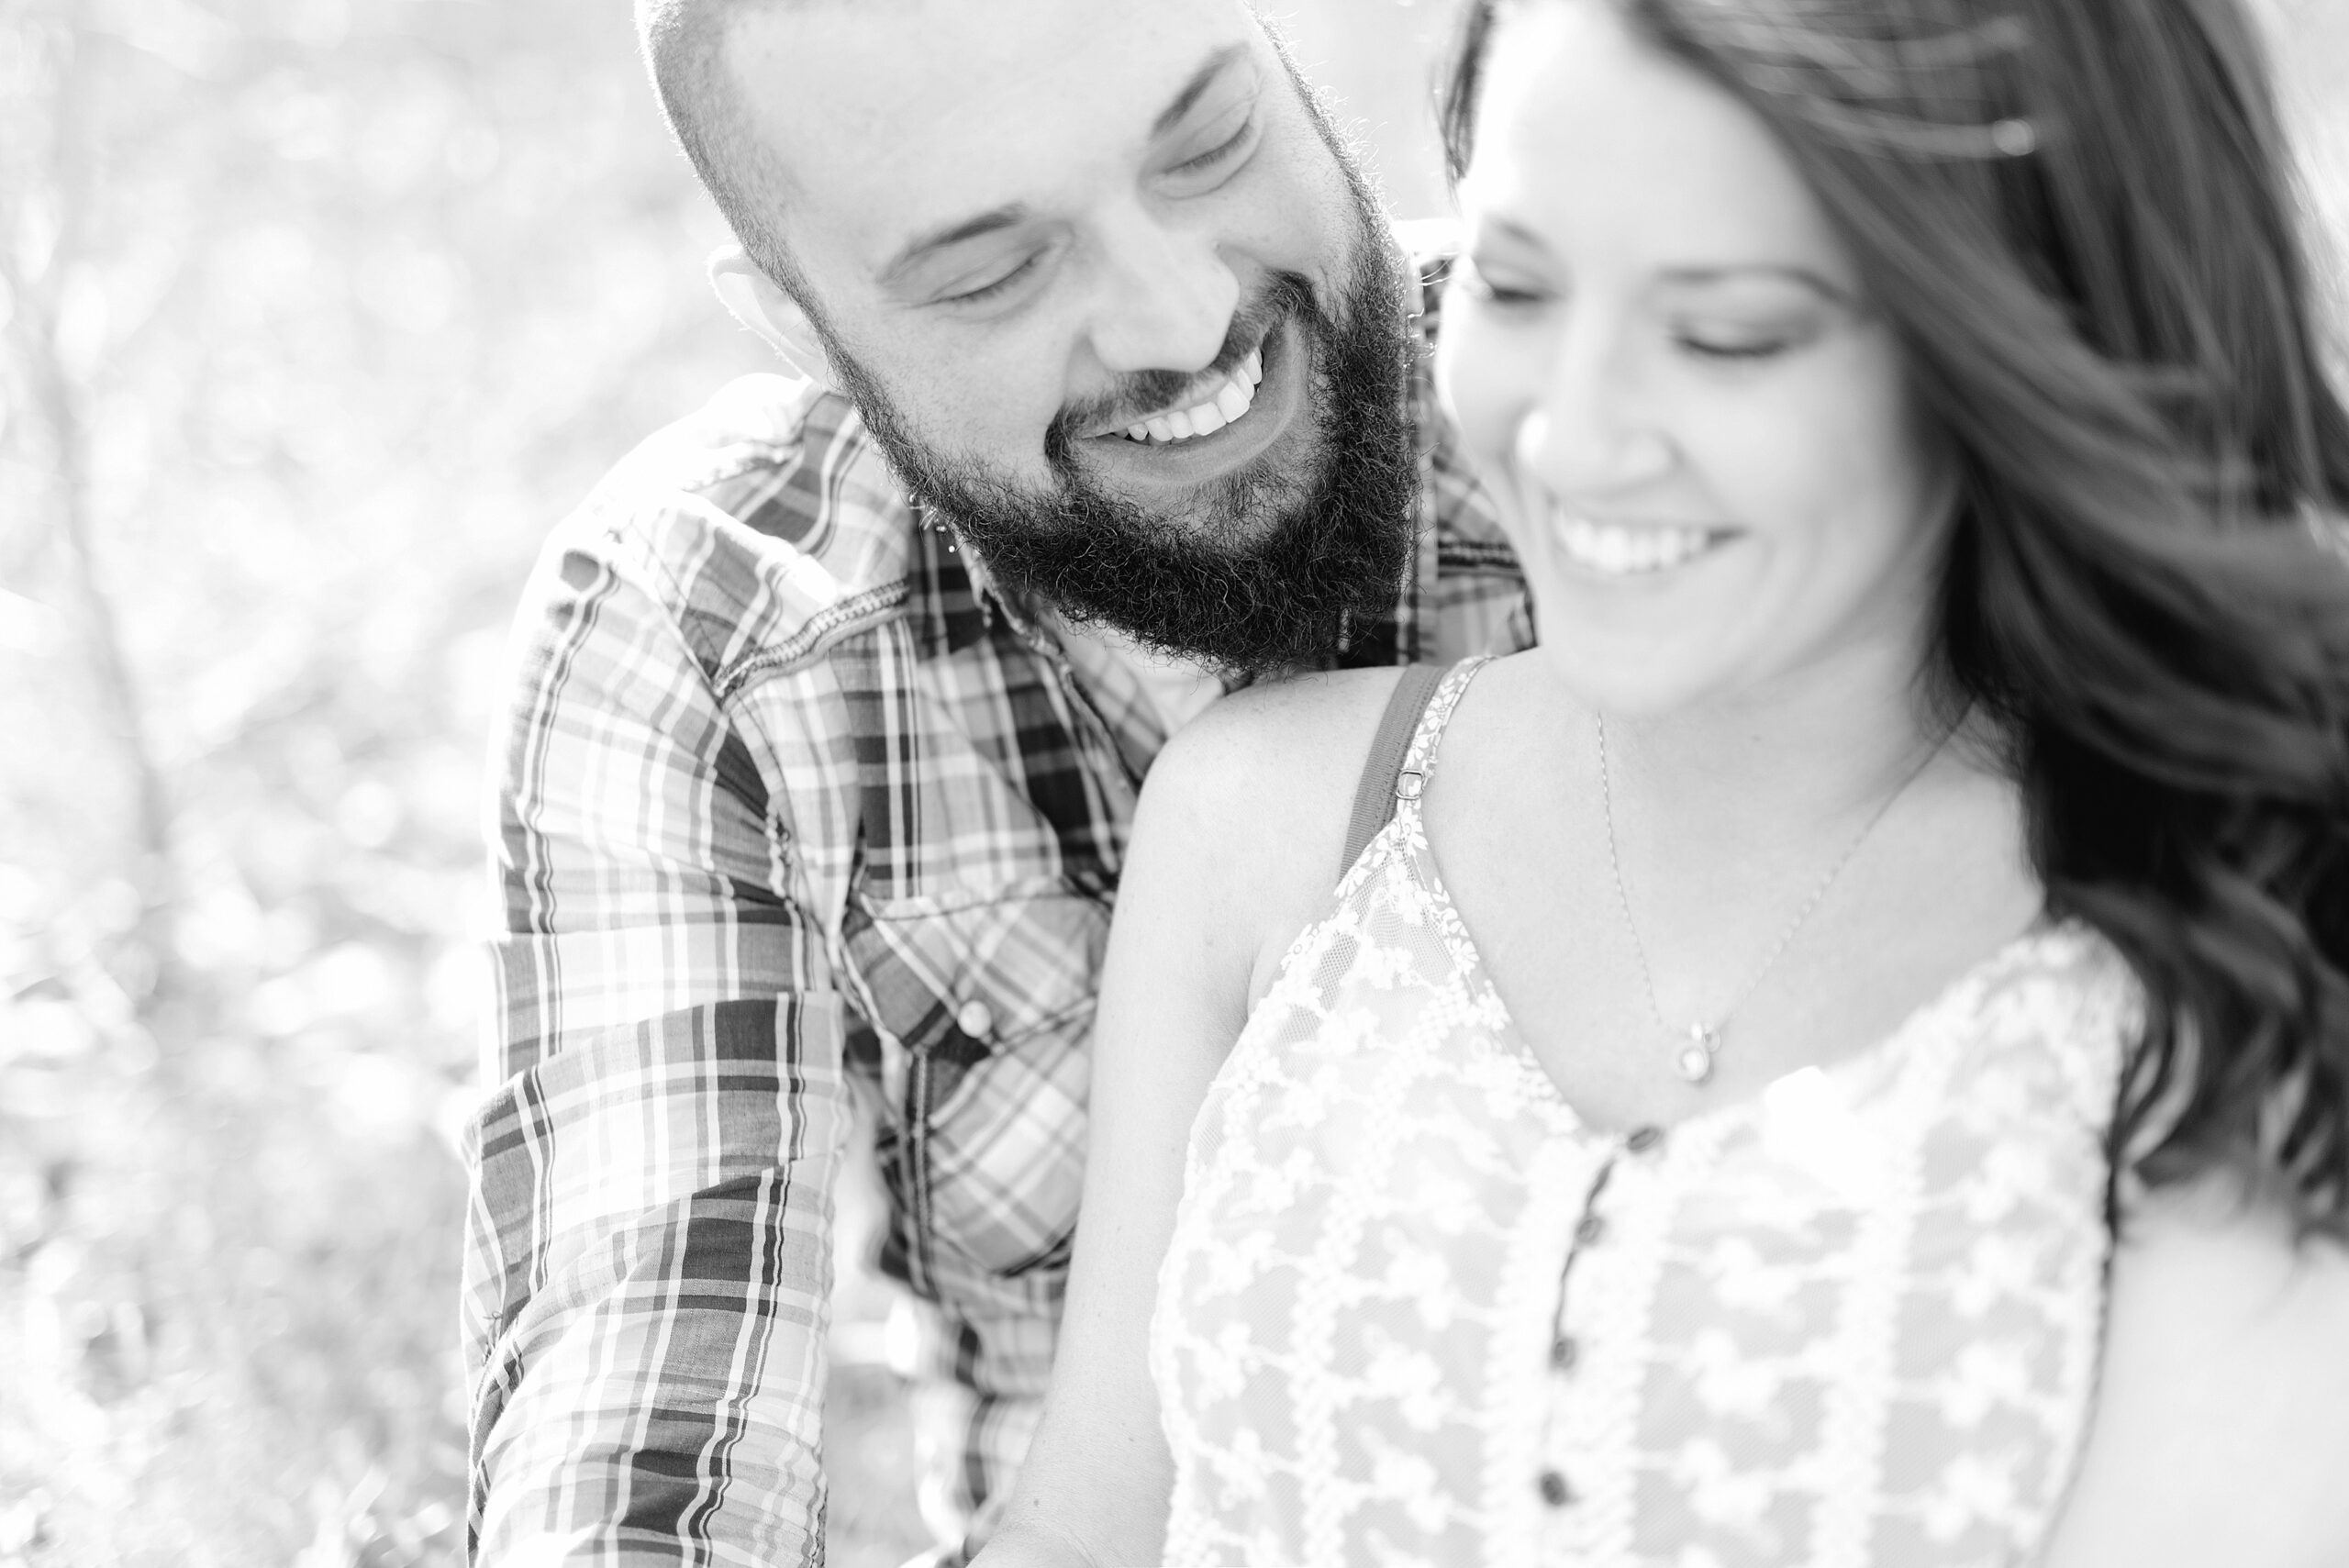 Indiana surprise proposal spring engagement session